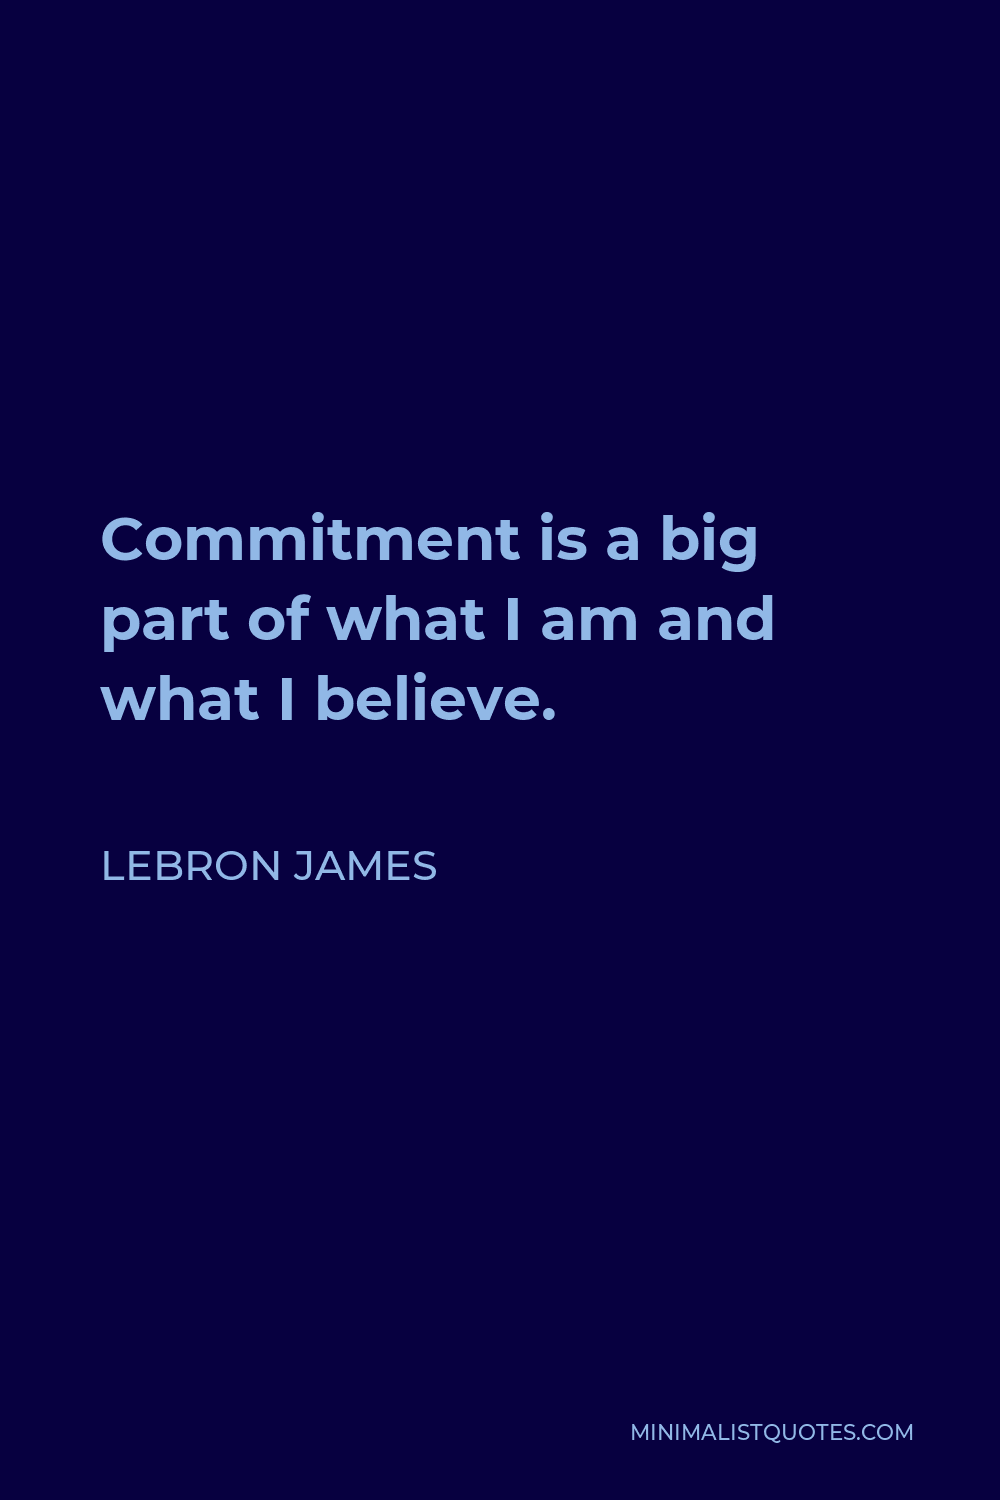 LeBron James Quote - Commitment is a big part of what I am and what I believe.